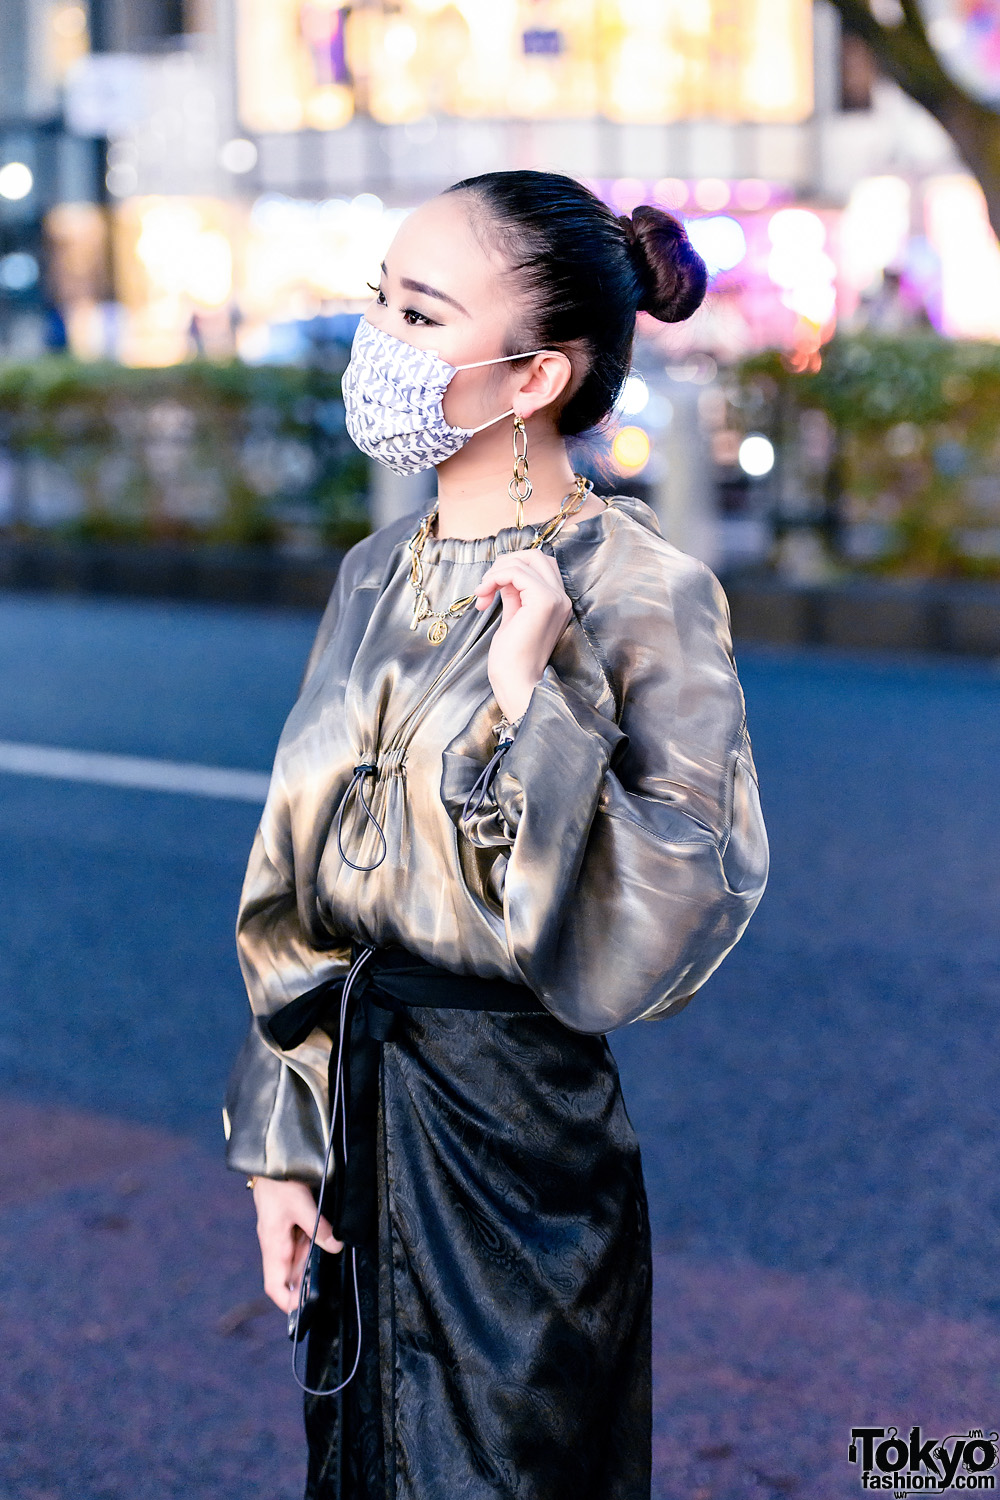 Juemi Tokyo Style w/ Printed Mask, Chain Earrings, Ruched Chiffon Top ...